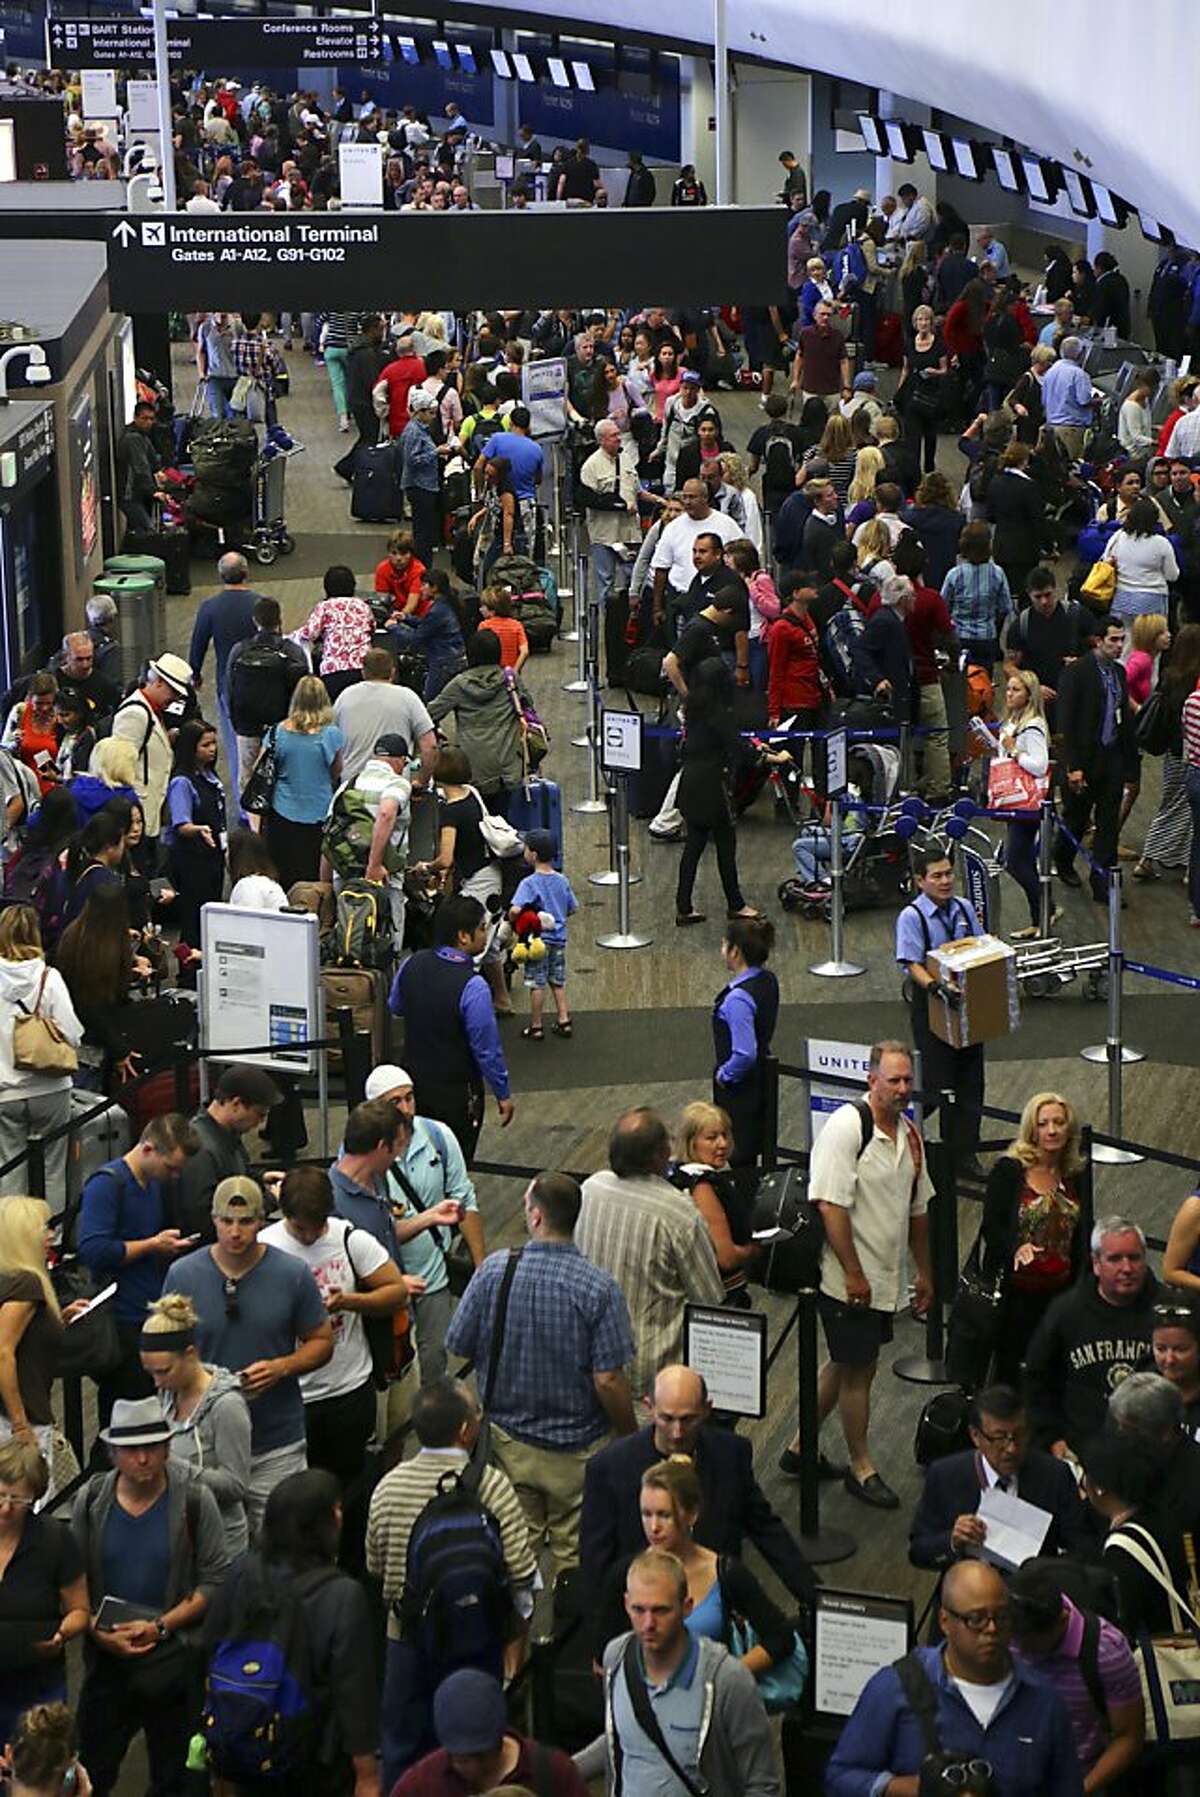 Passengers wait to speak to airline agents in a crowded terminal at San Francisco International Airport a day after the Asiana Airlines flight crash, in San Francisco, July 7, 2013. Two Chinese students were killed in the crash that also left 182 people injured, the authorities said. (Jim Wilson/The New York Times)